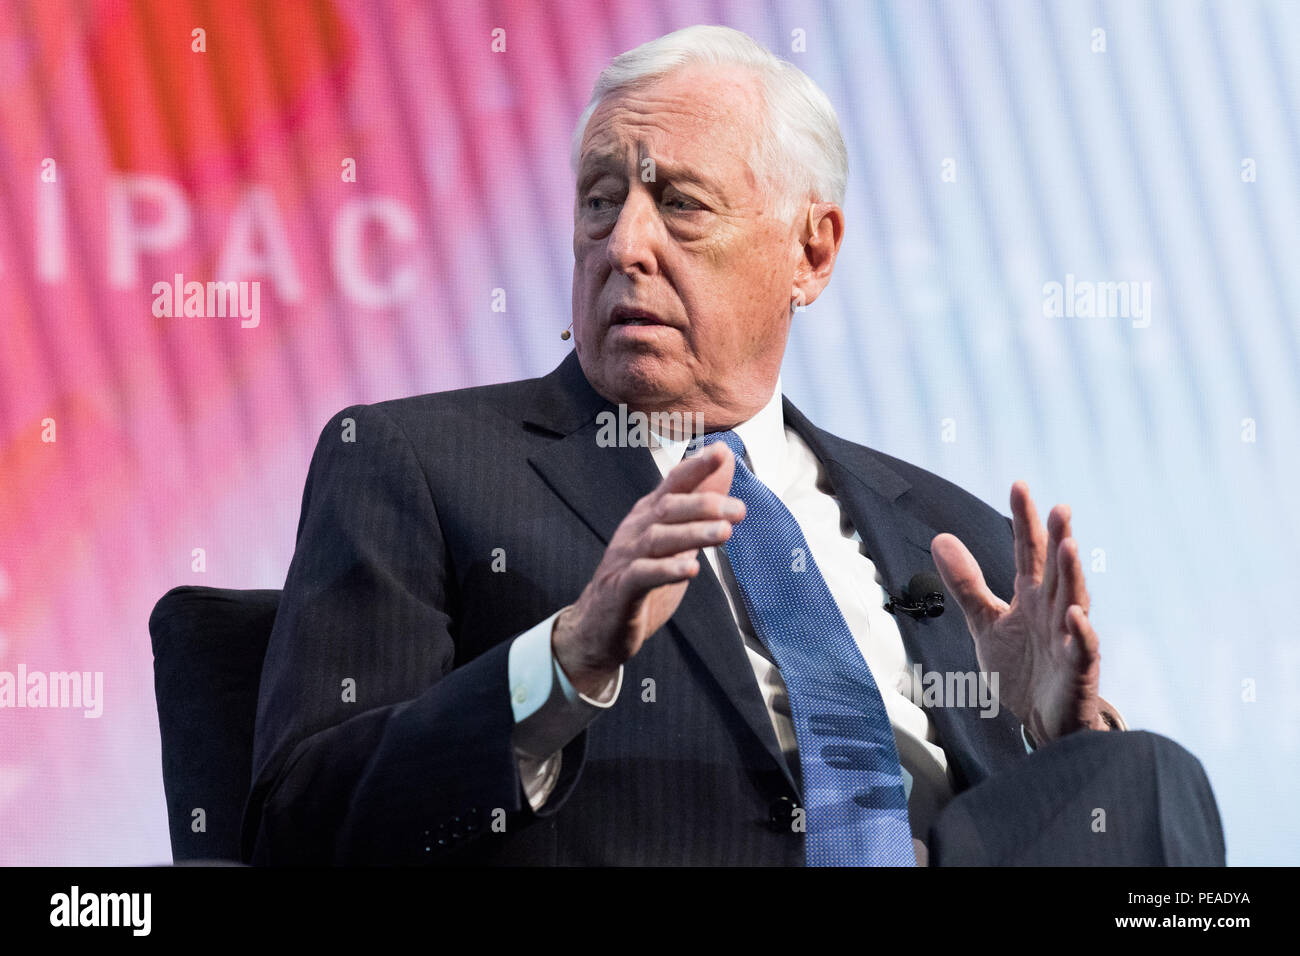 Steny Hoyer, Representative (D) for Maryland's 5th congressional district, speaking at the AIPAC (American Israel Public Affairs Committee) Policy Con Stock Photo